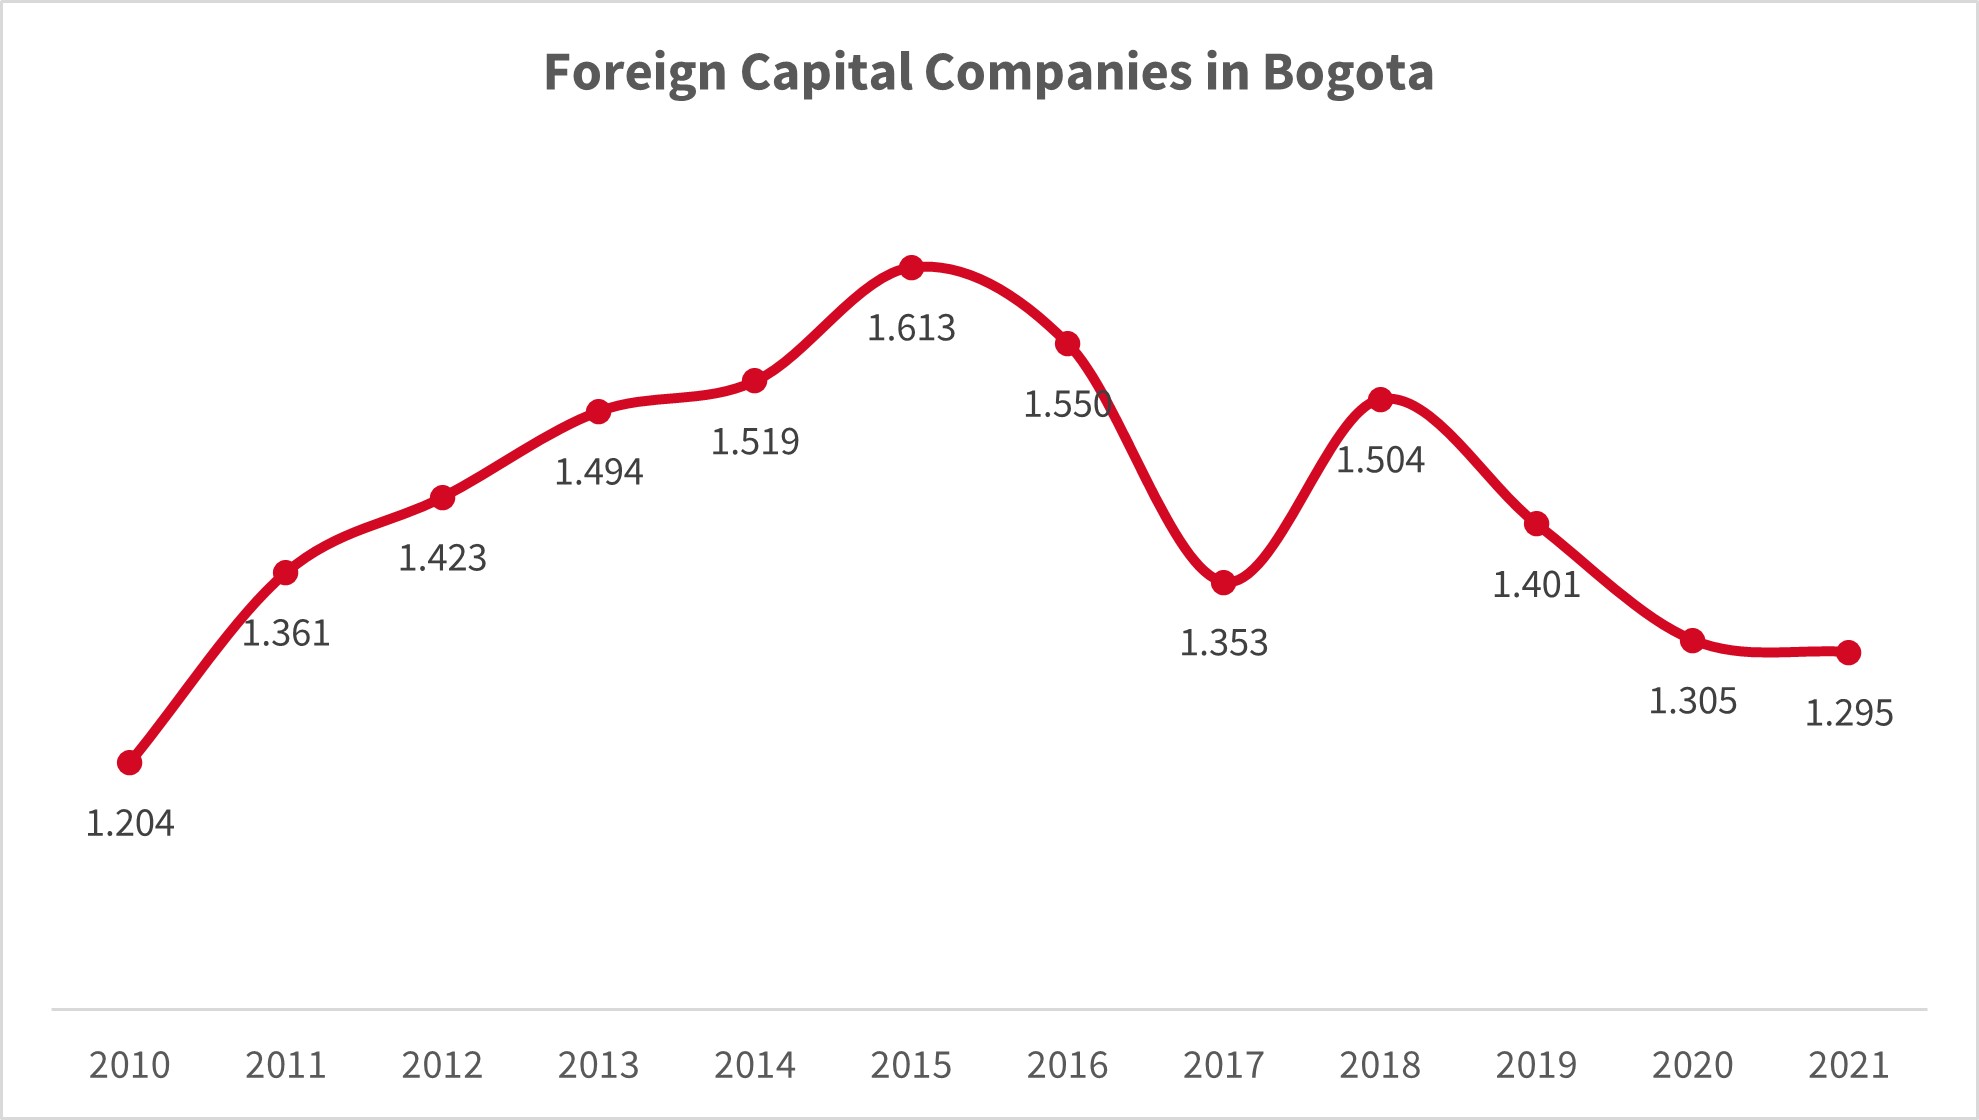 Foreign capital companies in Bogota